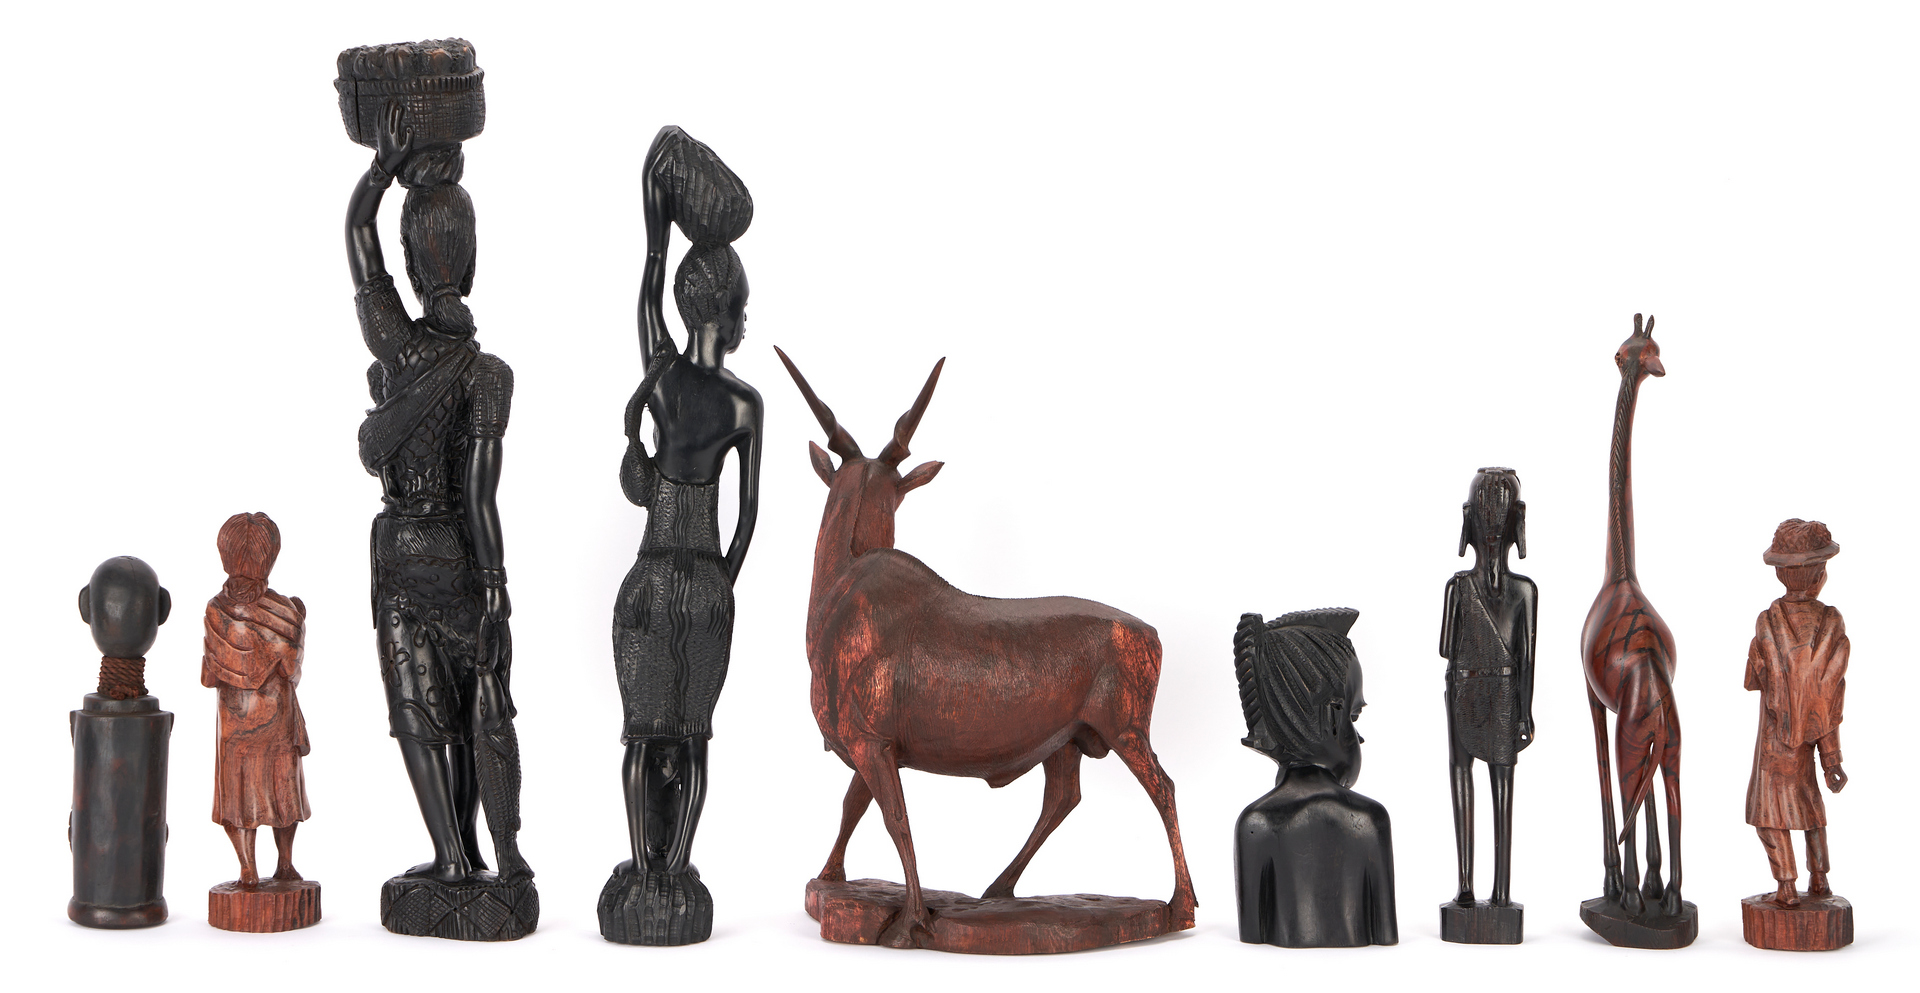 Lot 493: Collection of 32 Ethnographic Sculptures & Masks, mostly African